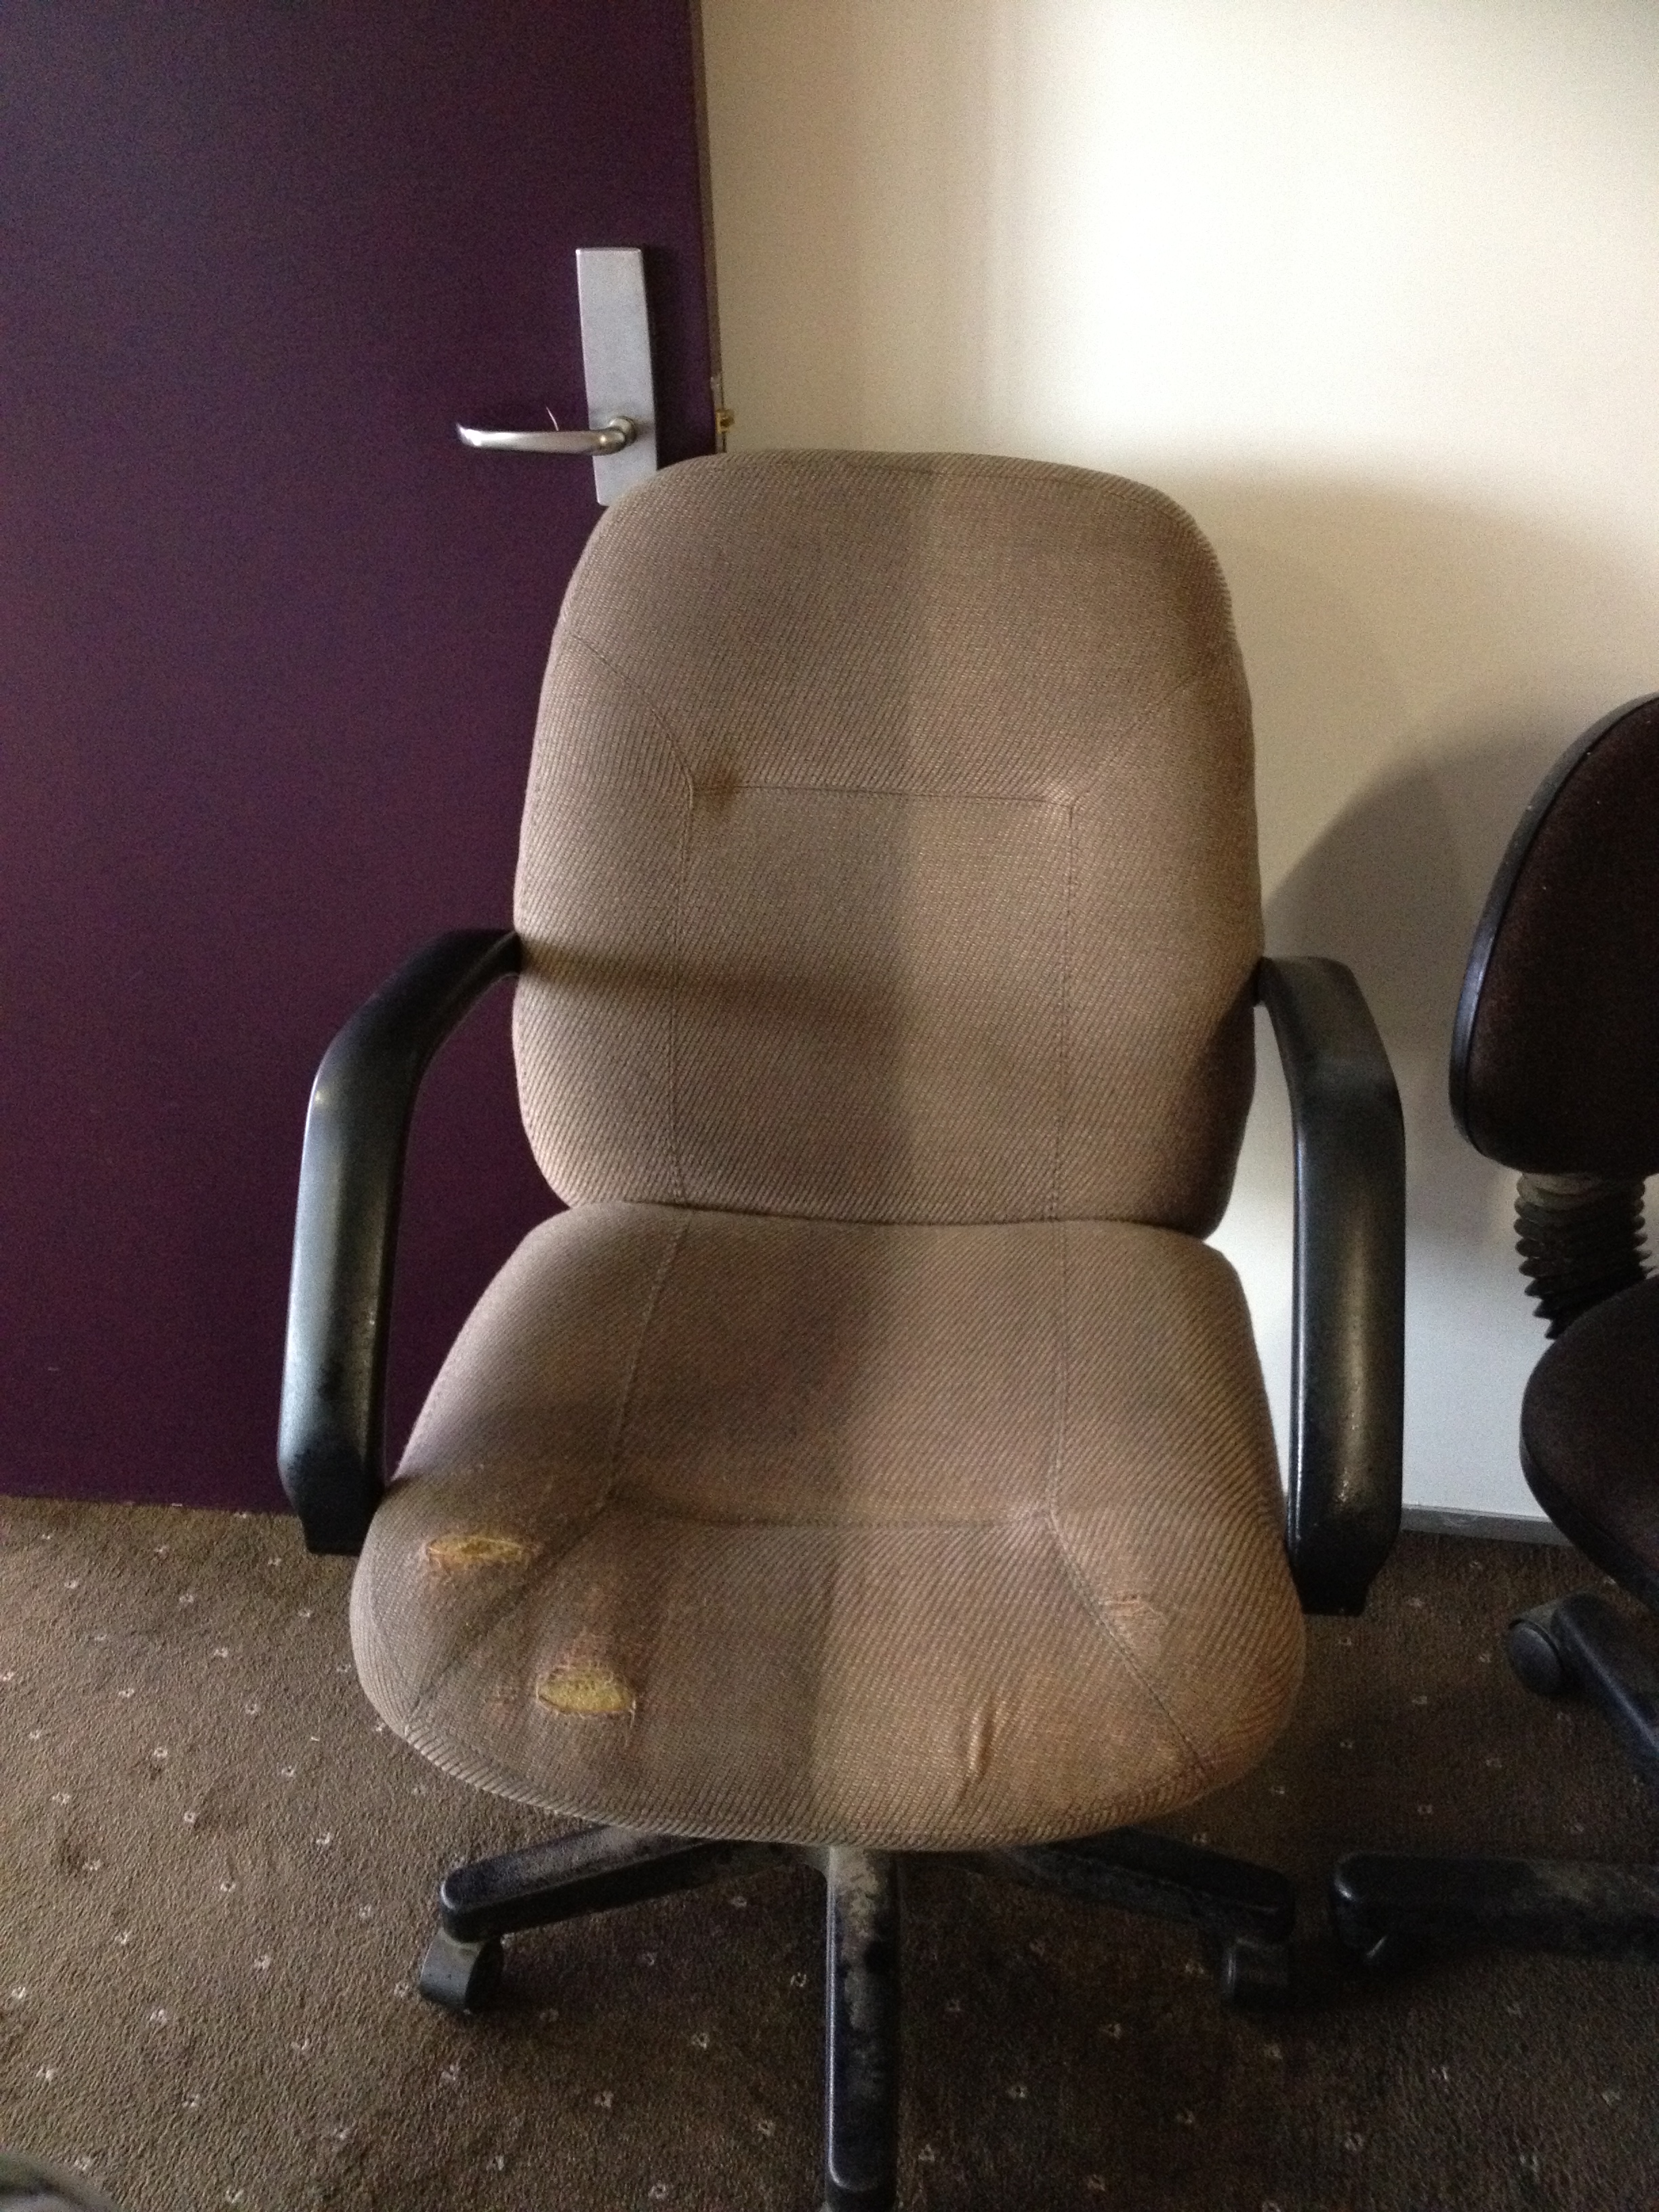 Office chairs at home & work - Quality Carpet Care and Pest Management